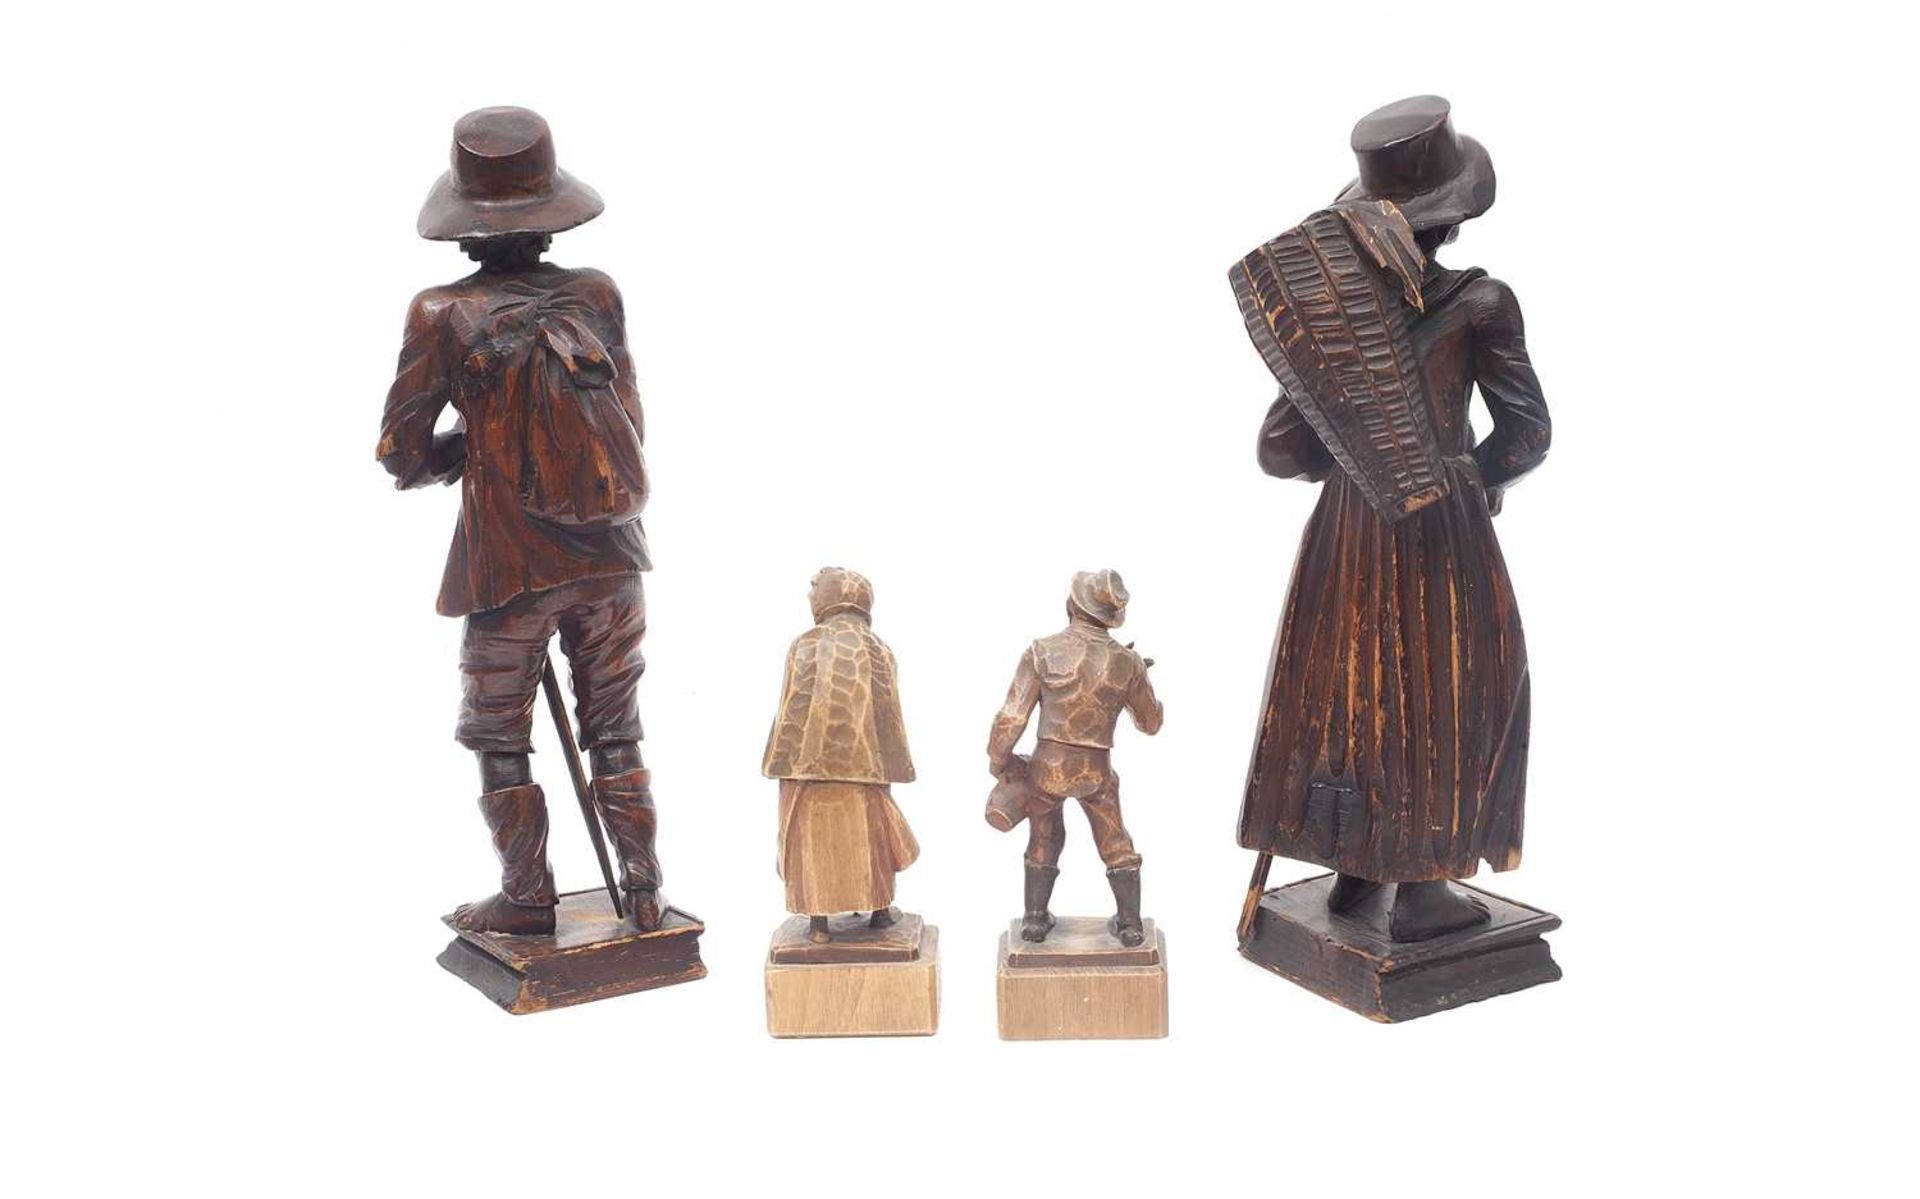 TWO PAIRS OF 19TH CENTURY AUSTRIAN CARVED WOOD FIGURES OF BEGGARS - Image 2 of 2